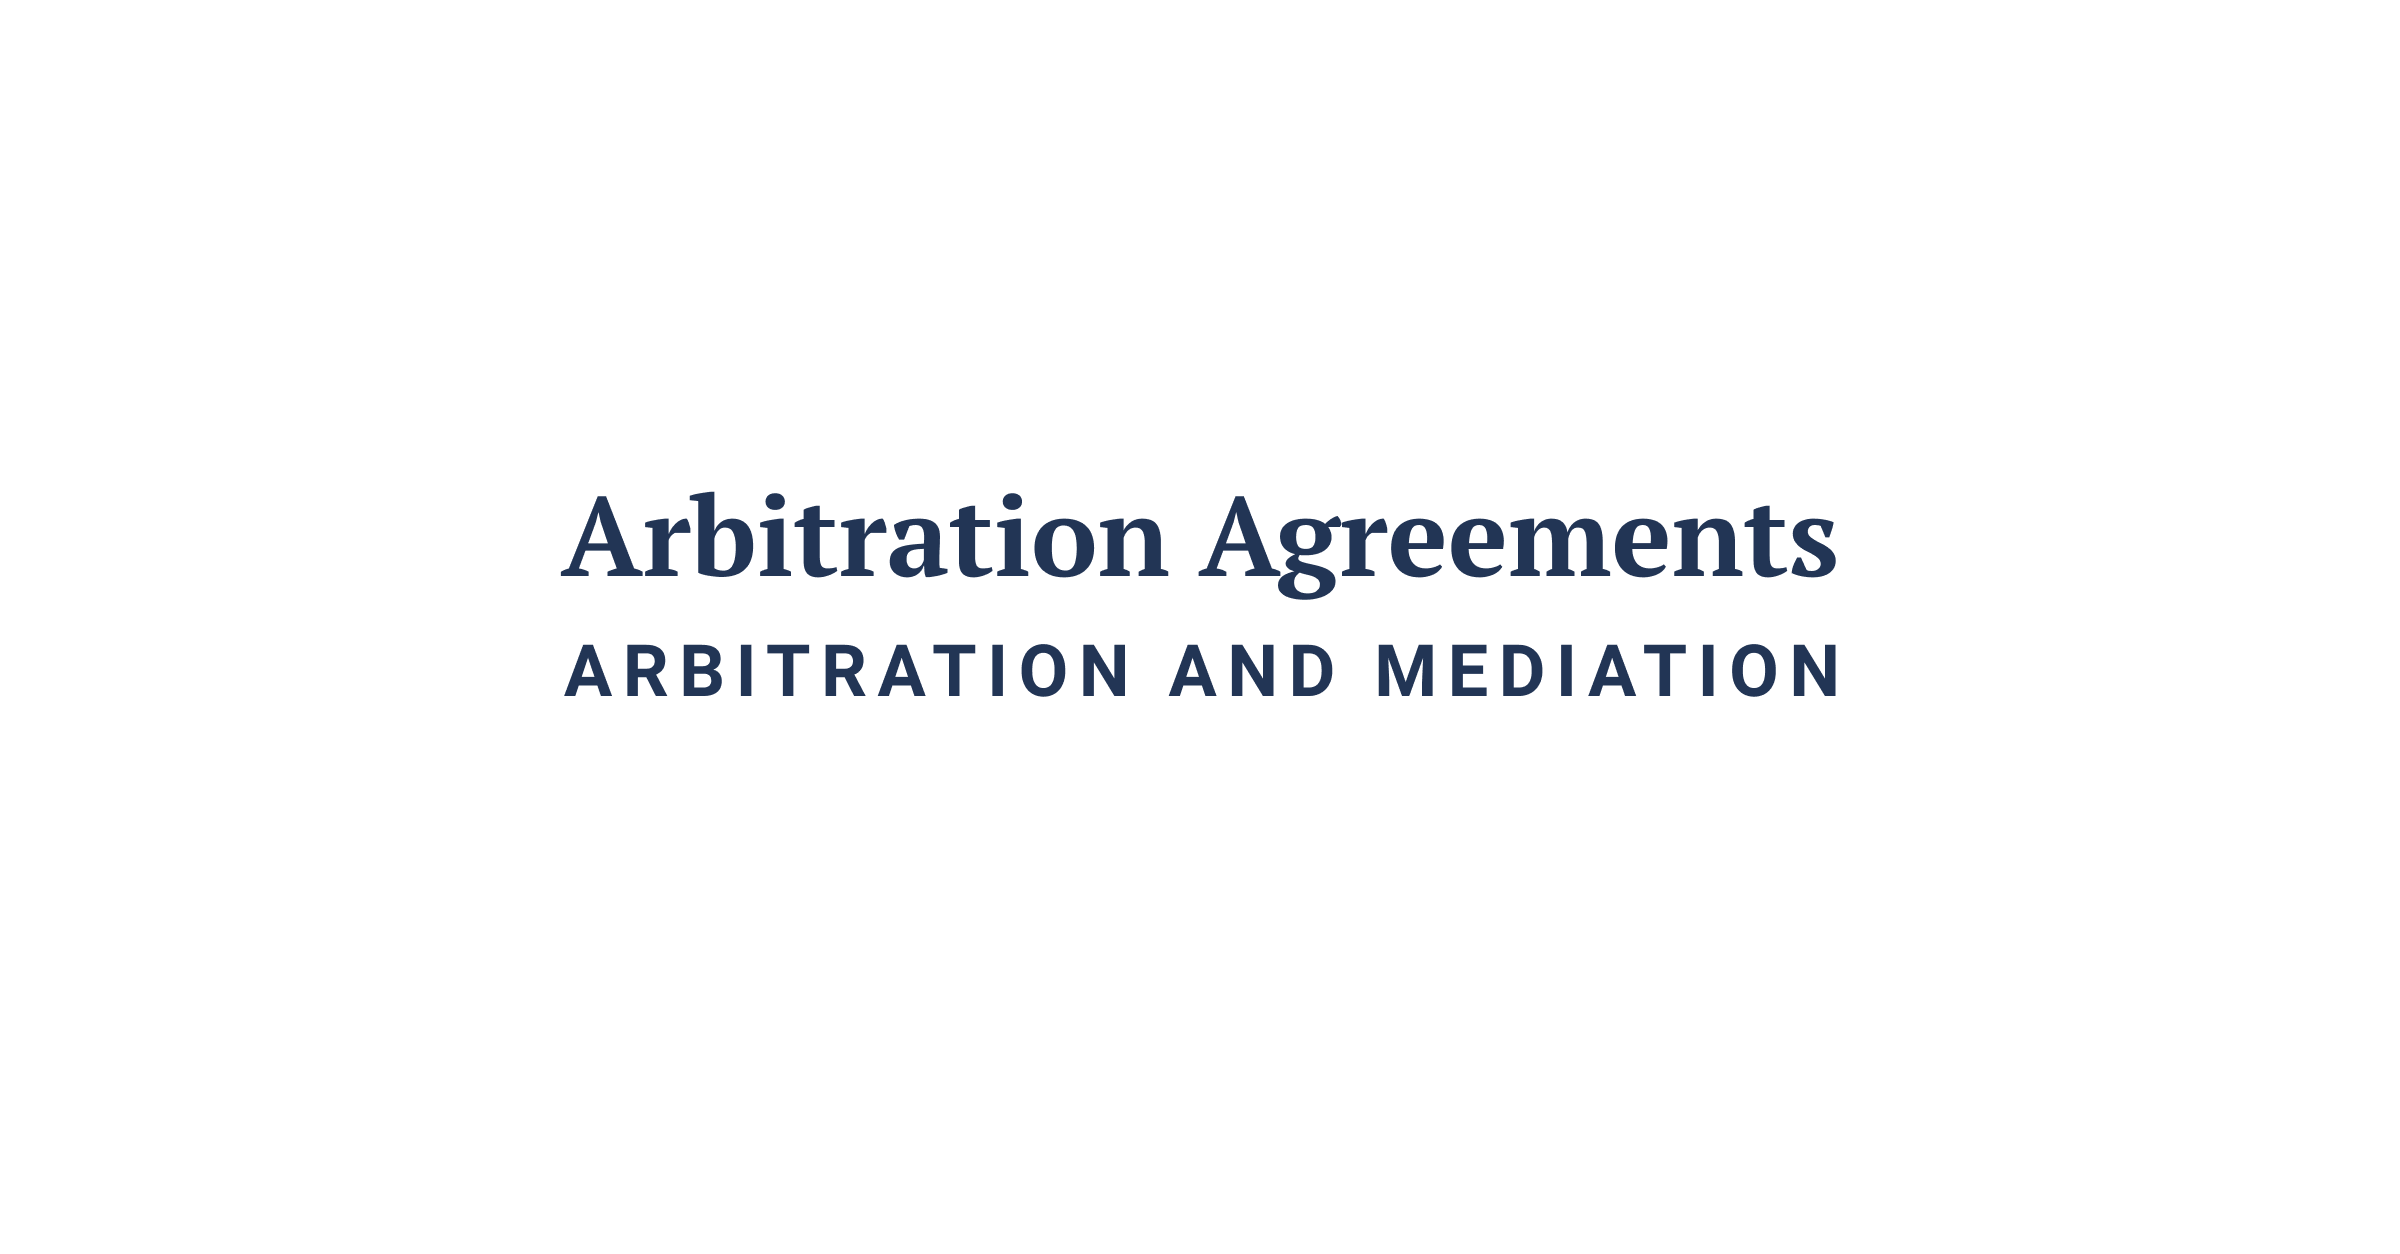 Arbitration Company product image reference 3